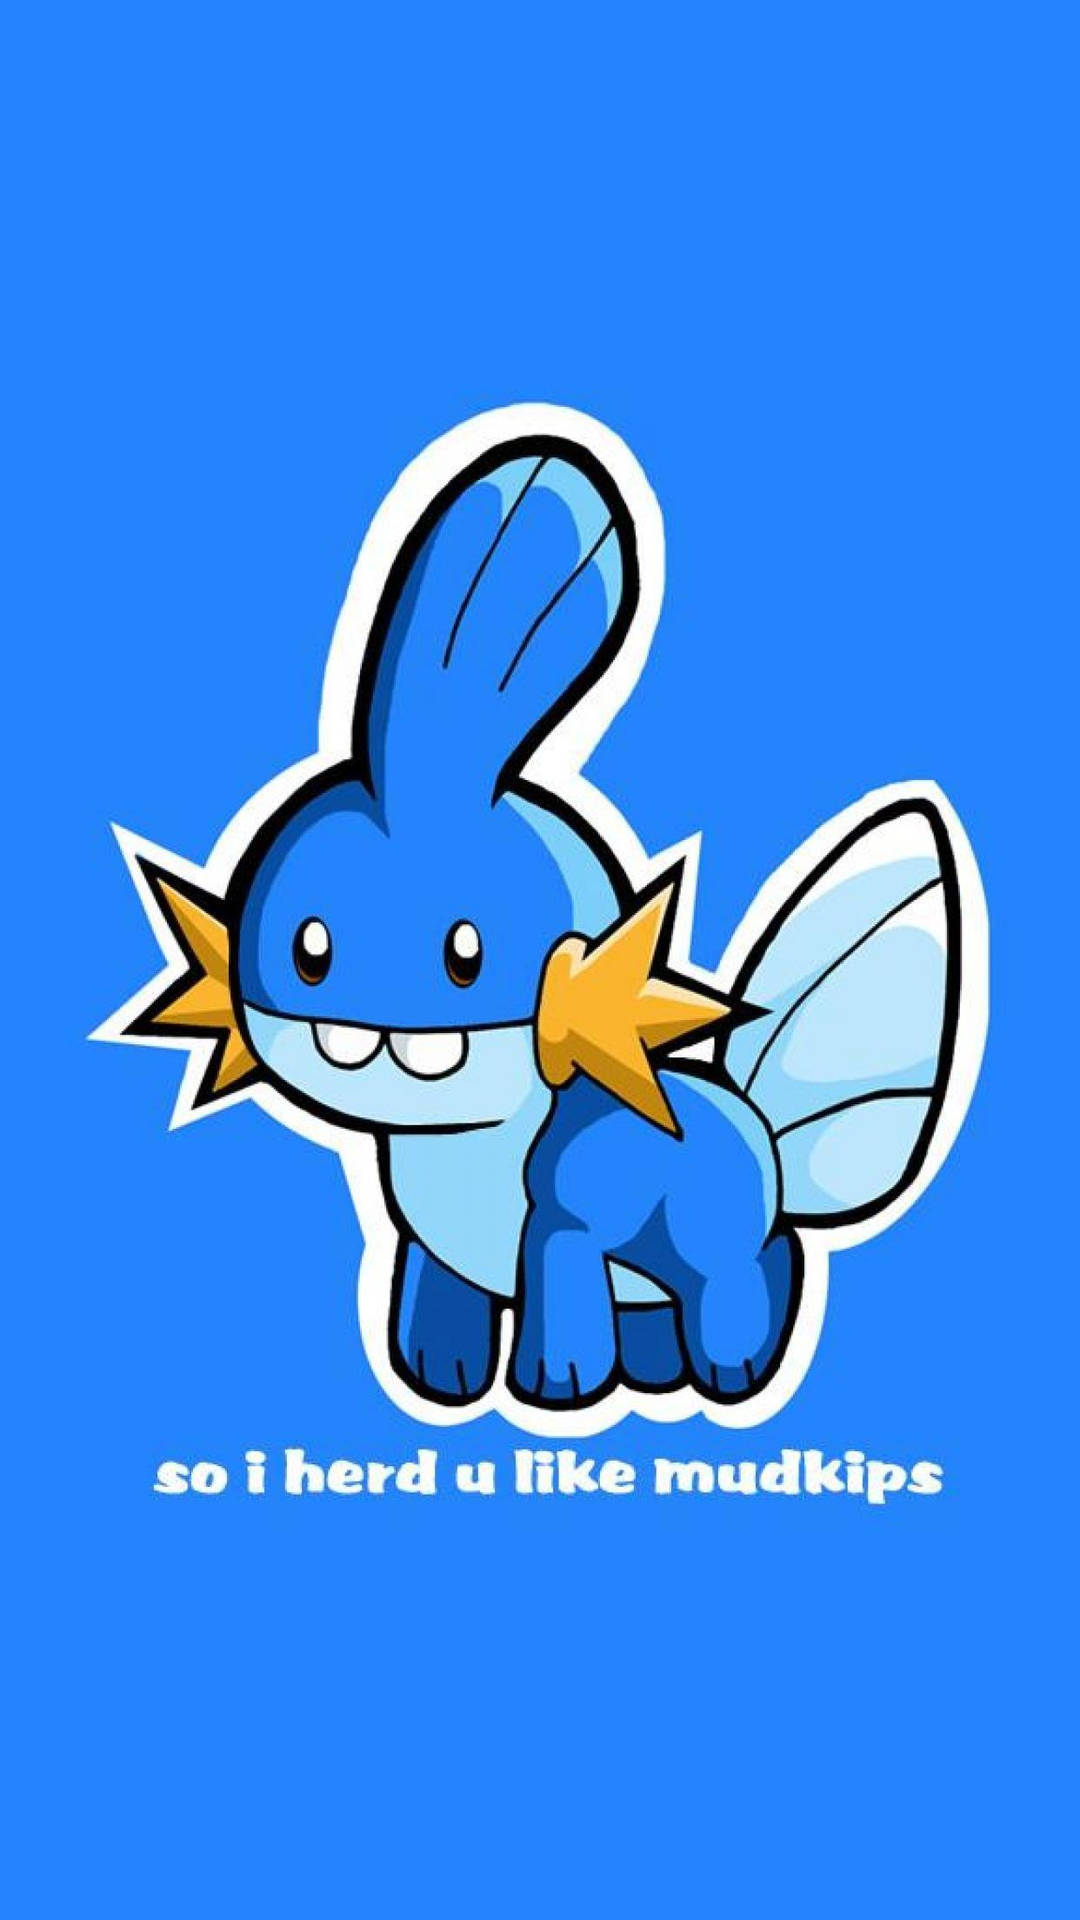 An Adorable Mudkip Plushie Waits for A Playmate Wallpaper